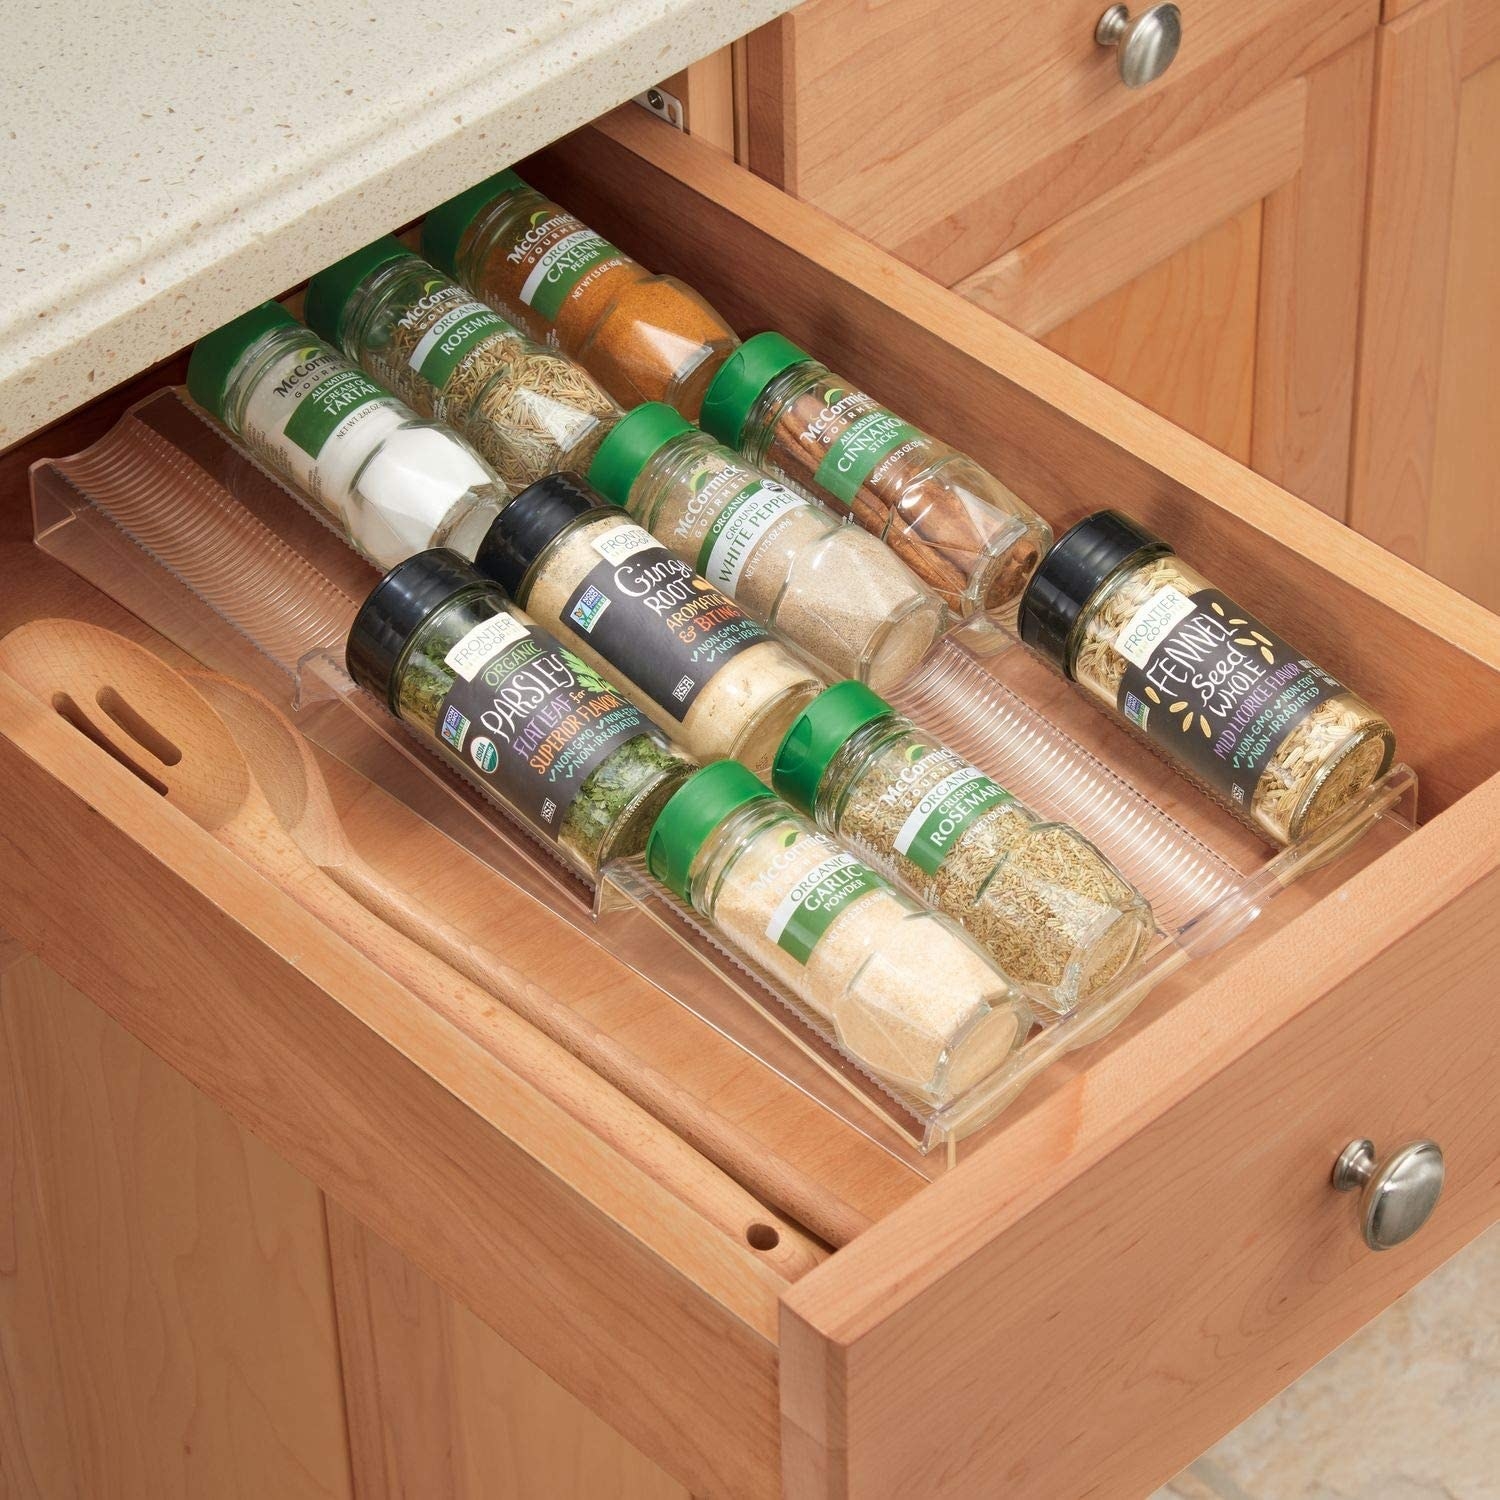 Several spice bottle in the organizer